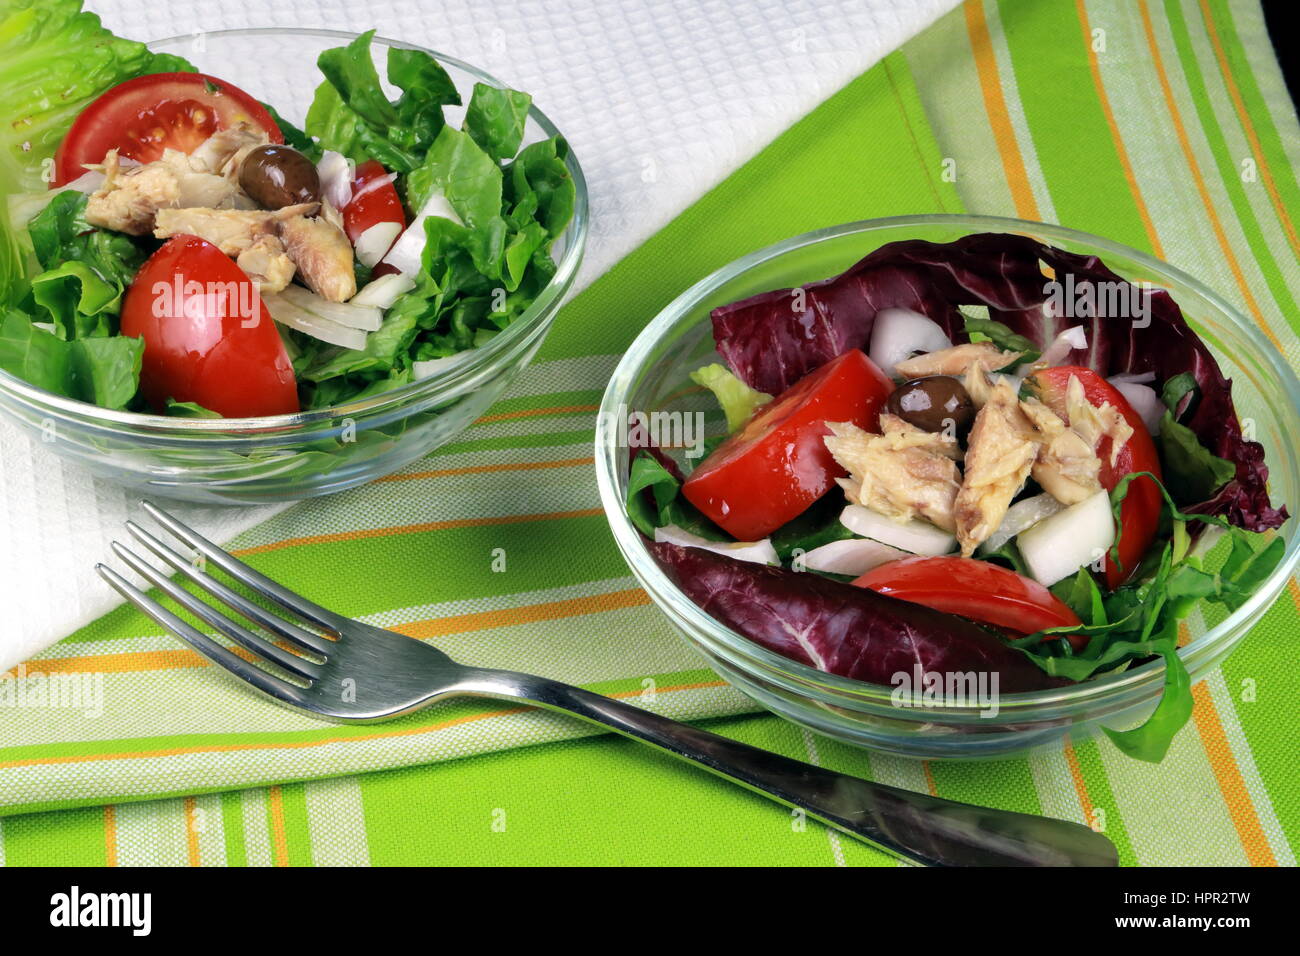 Lettuce, tomato, olive and mackerel summer salad served in glass bowls on colorful kitchen cloth with fork - Healthy food for green living Stock Photo